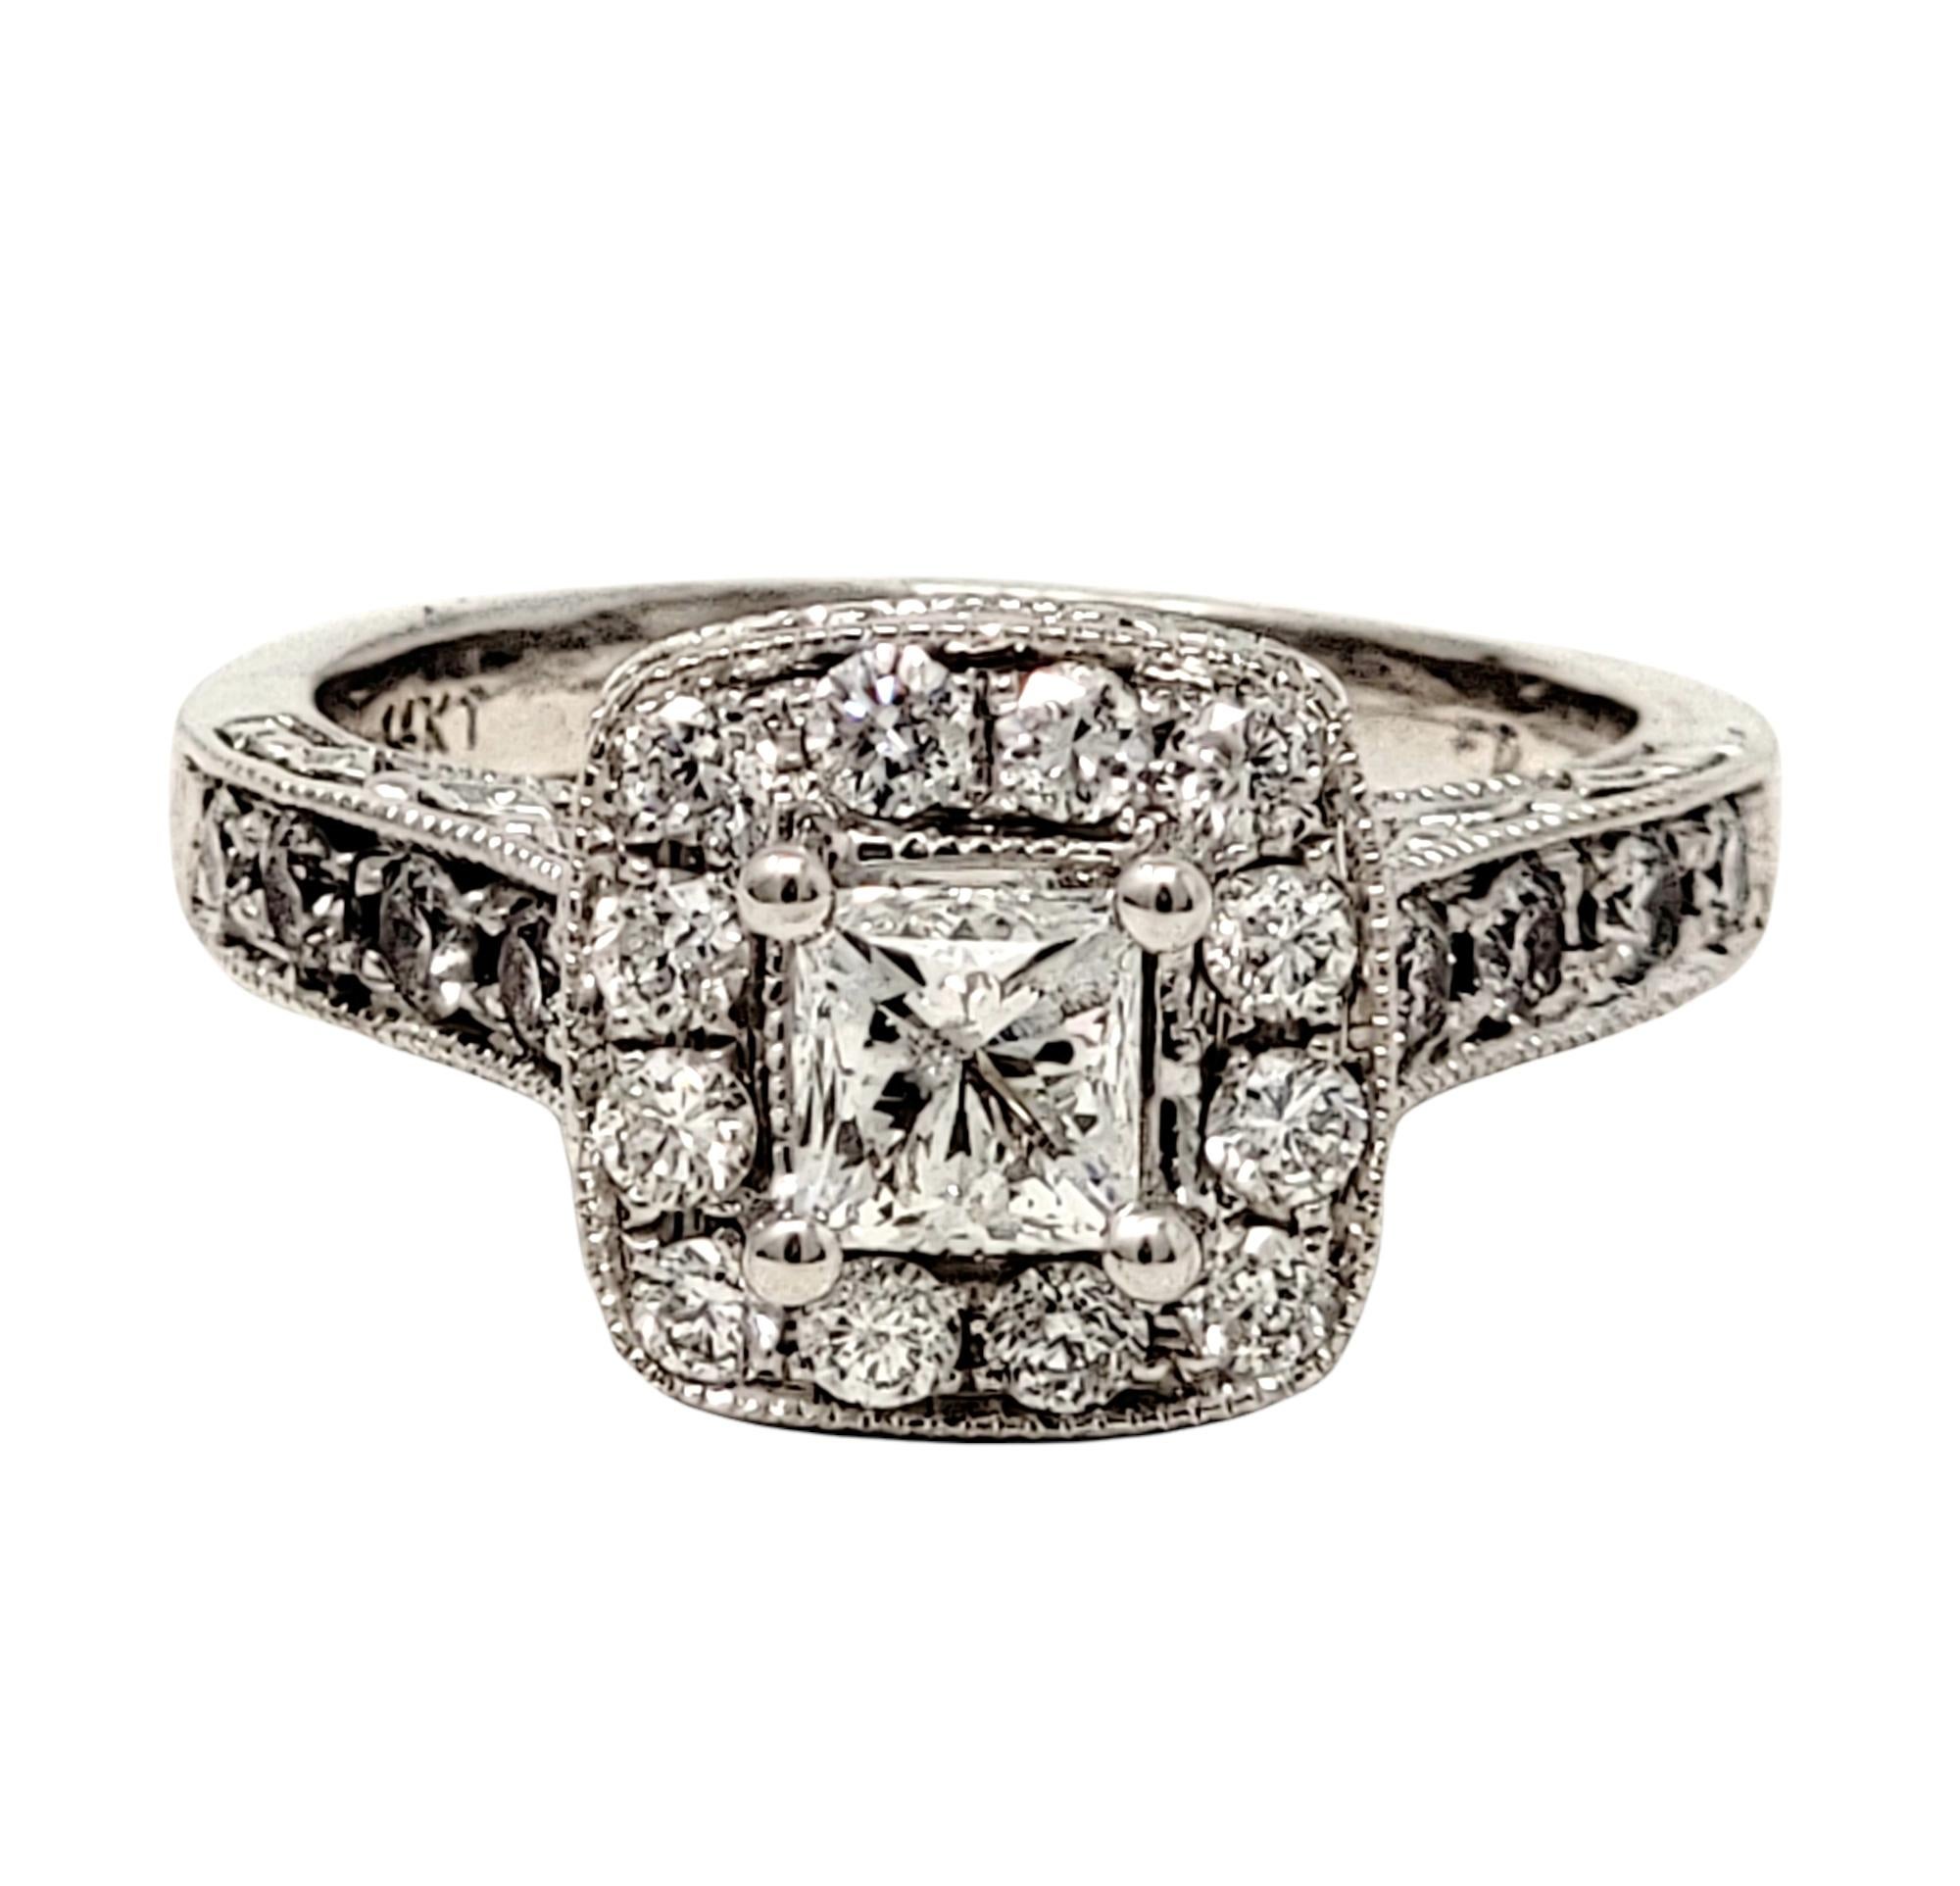 1.38 Carat Total Princess Cut Diamond Halo Engagement Ring 14 Karat White Gold In Good Condition For Sale In Scottsdale, AZ